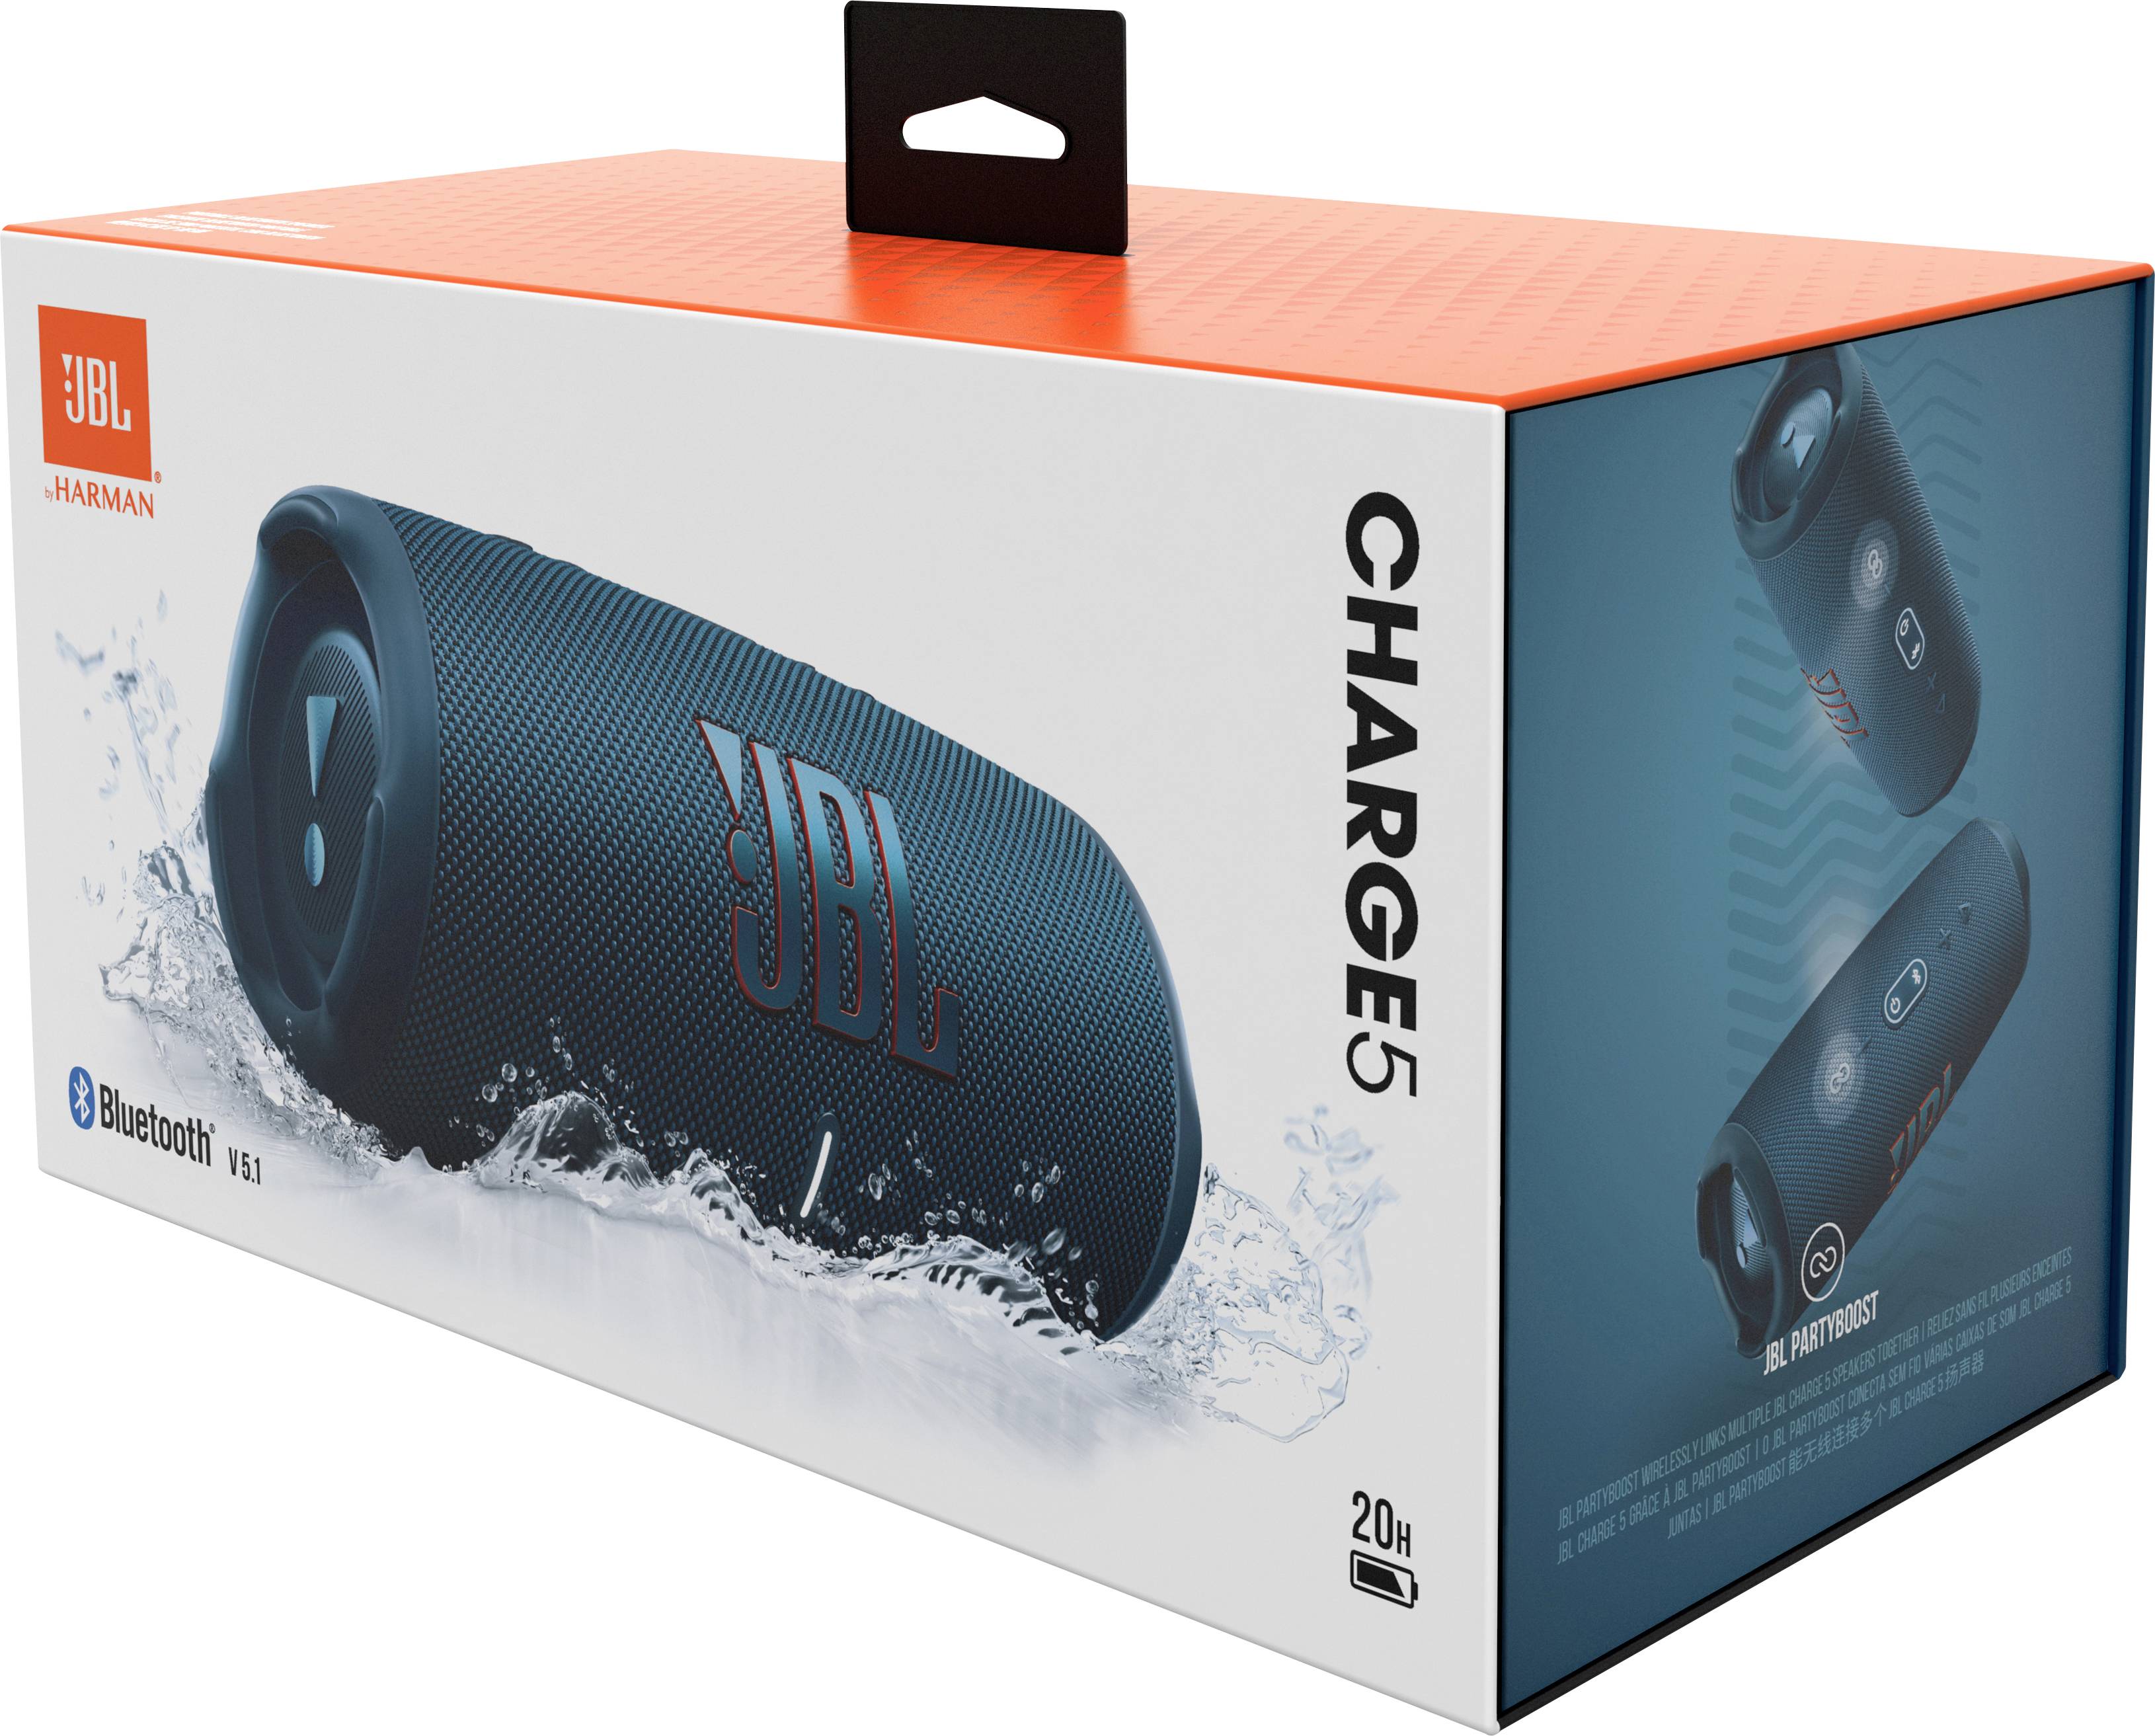 JBL CHARGE 5 Bluetooth speaker Outdoor, Water-proof, USB Blue